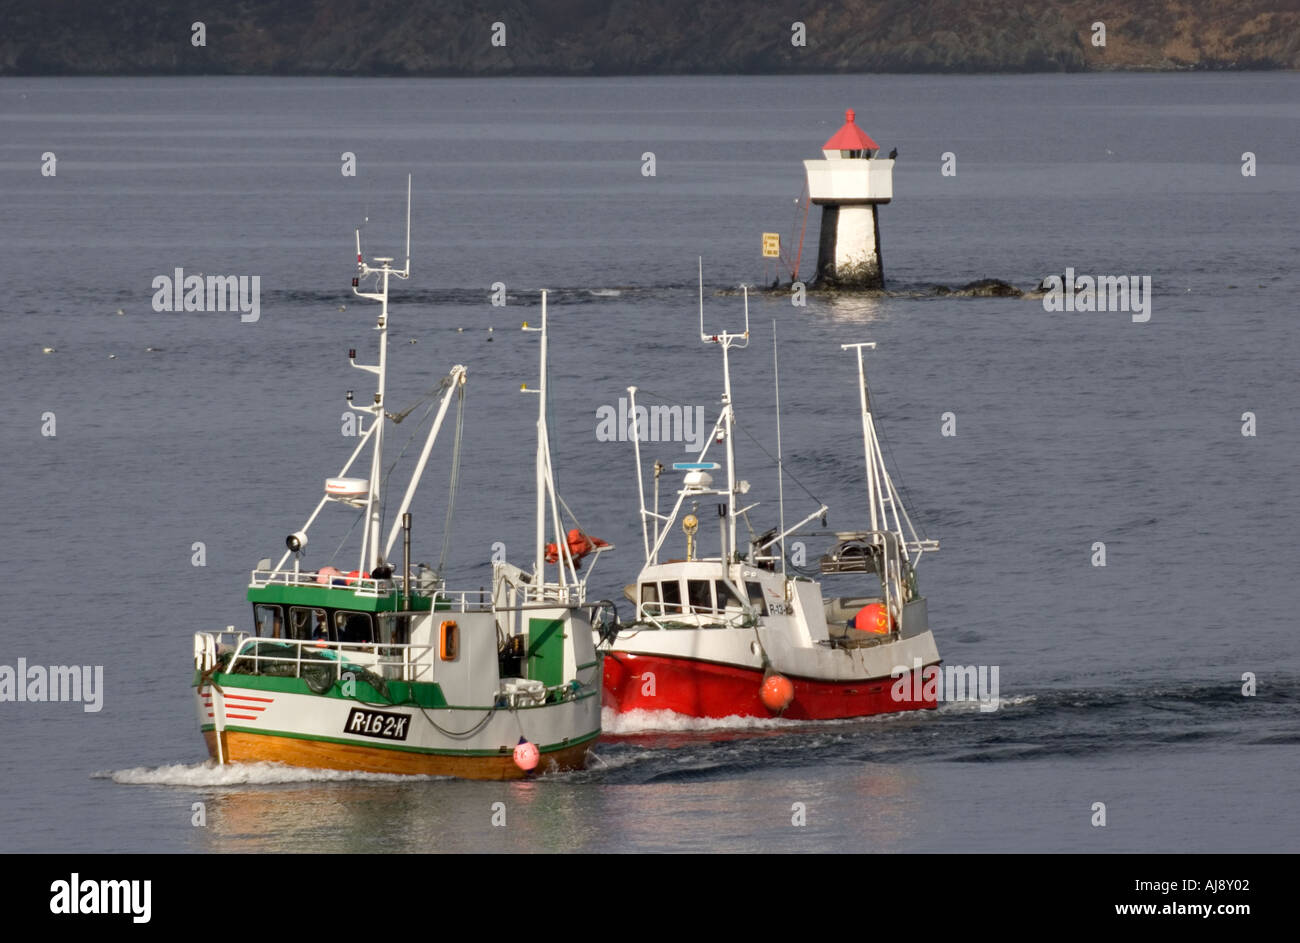 Local fishing boat in Karmsundet, close to the city of Haugesund, Norway. Stock Photo